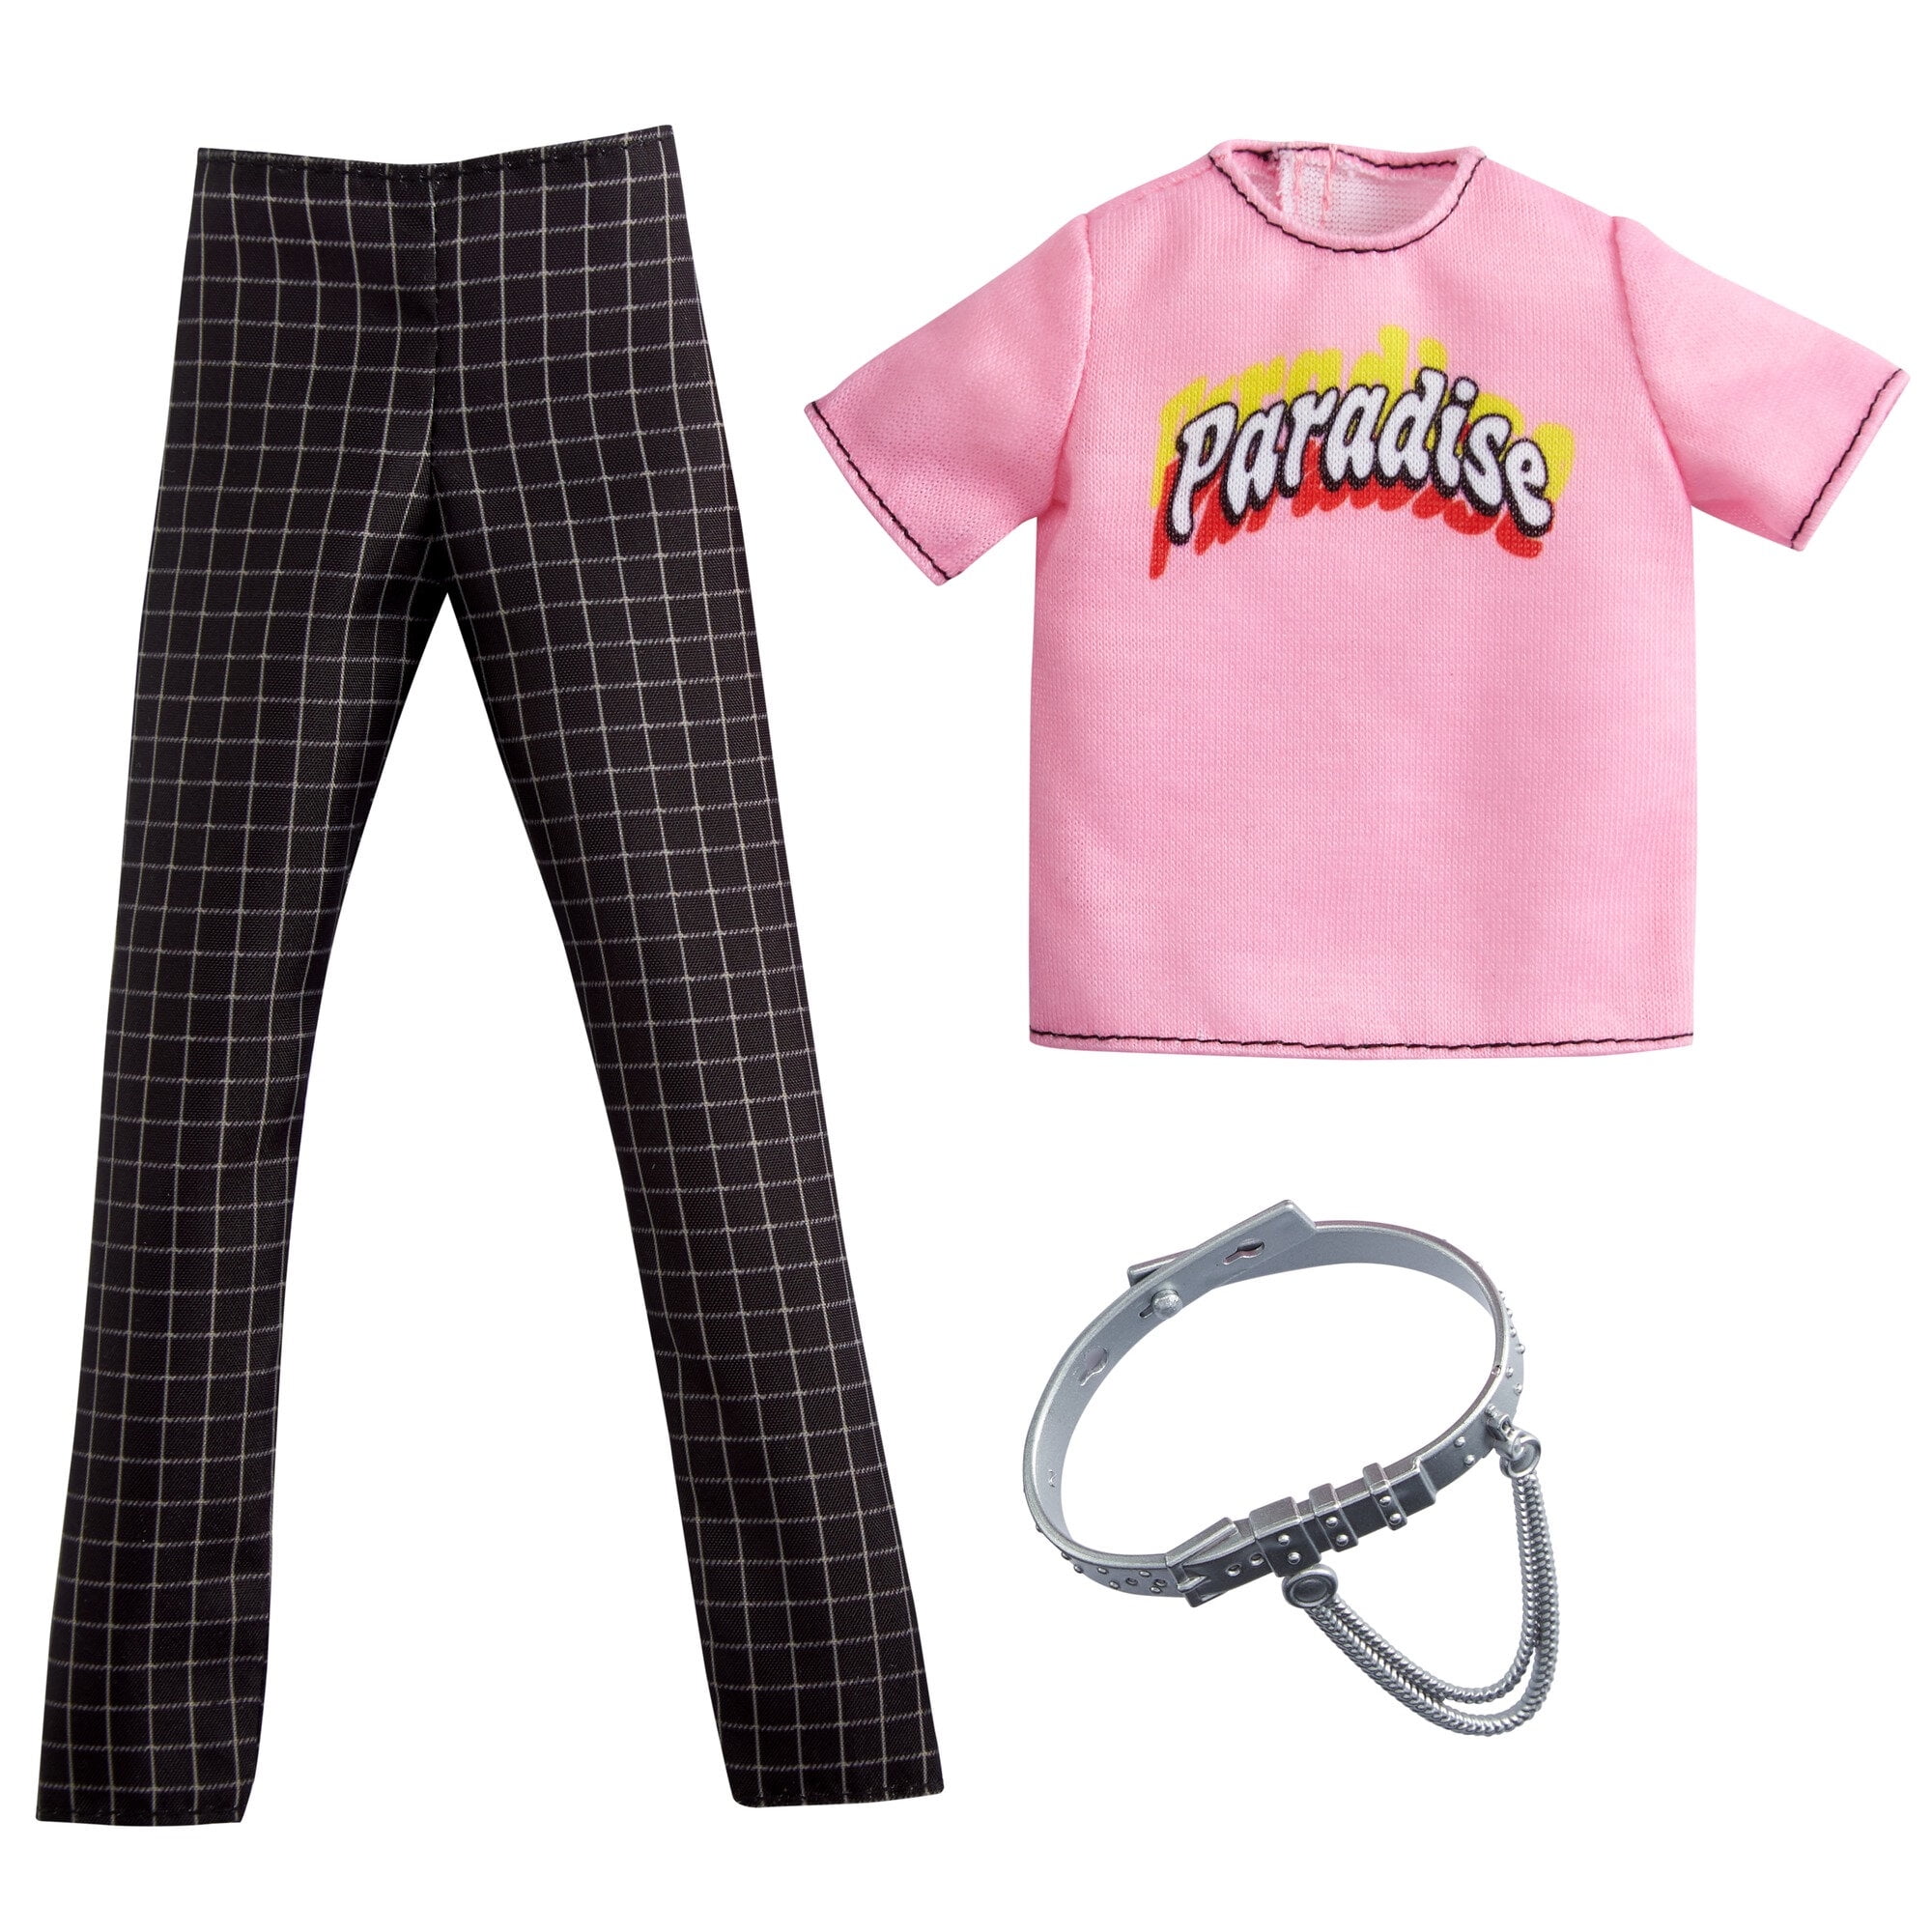 Fashions Pack: Doll Clothes Pink “Paradise” Top, Checked Pants Chain Belt - Walmart.com